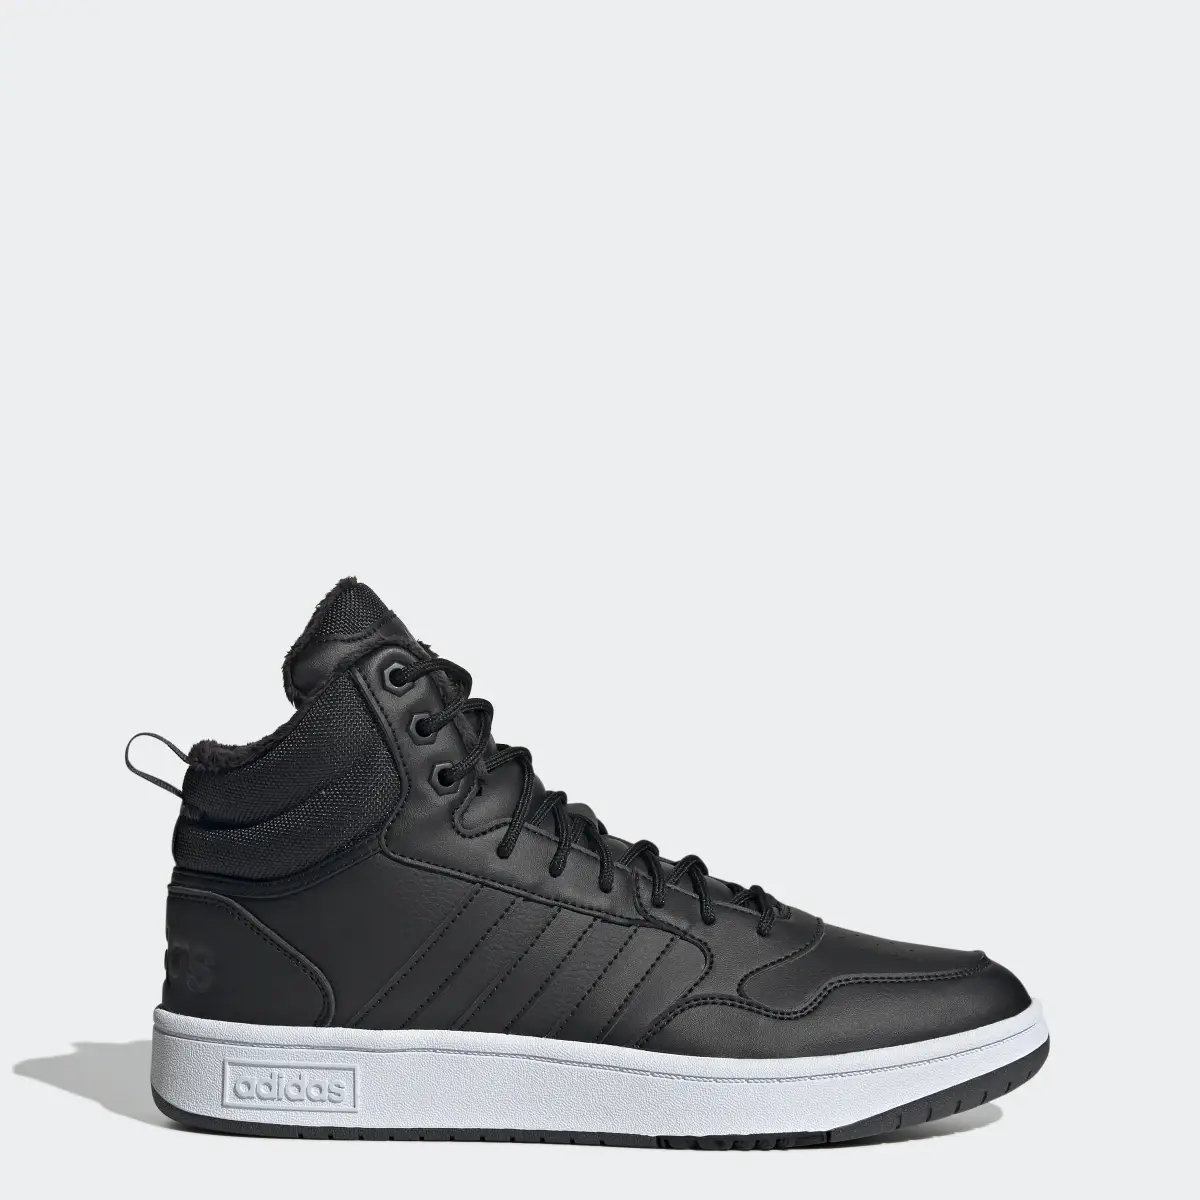 Adidas Hoops 3.0 Mid Classic Fur Lining Winterized Shoes. 1